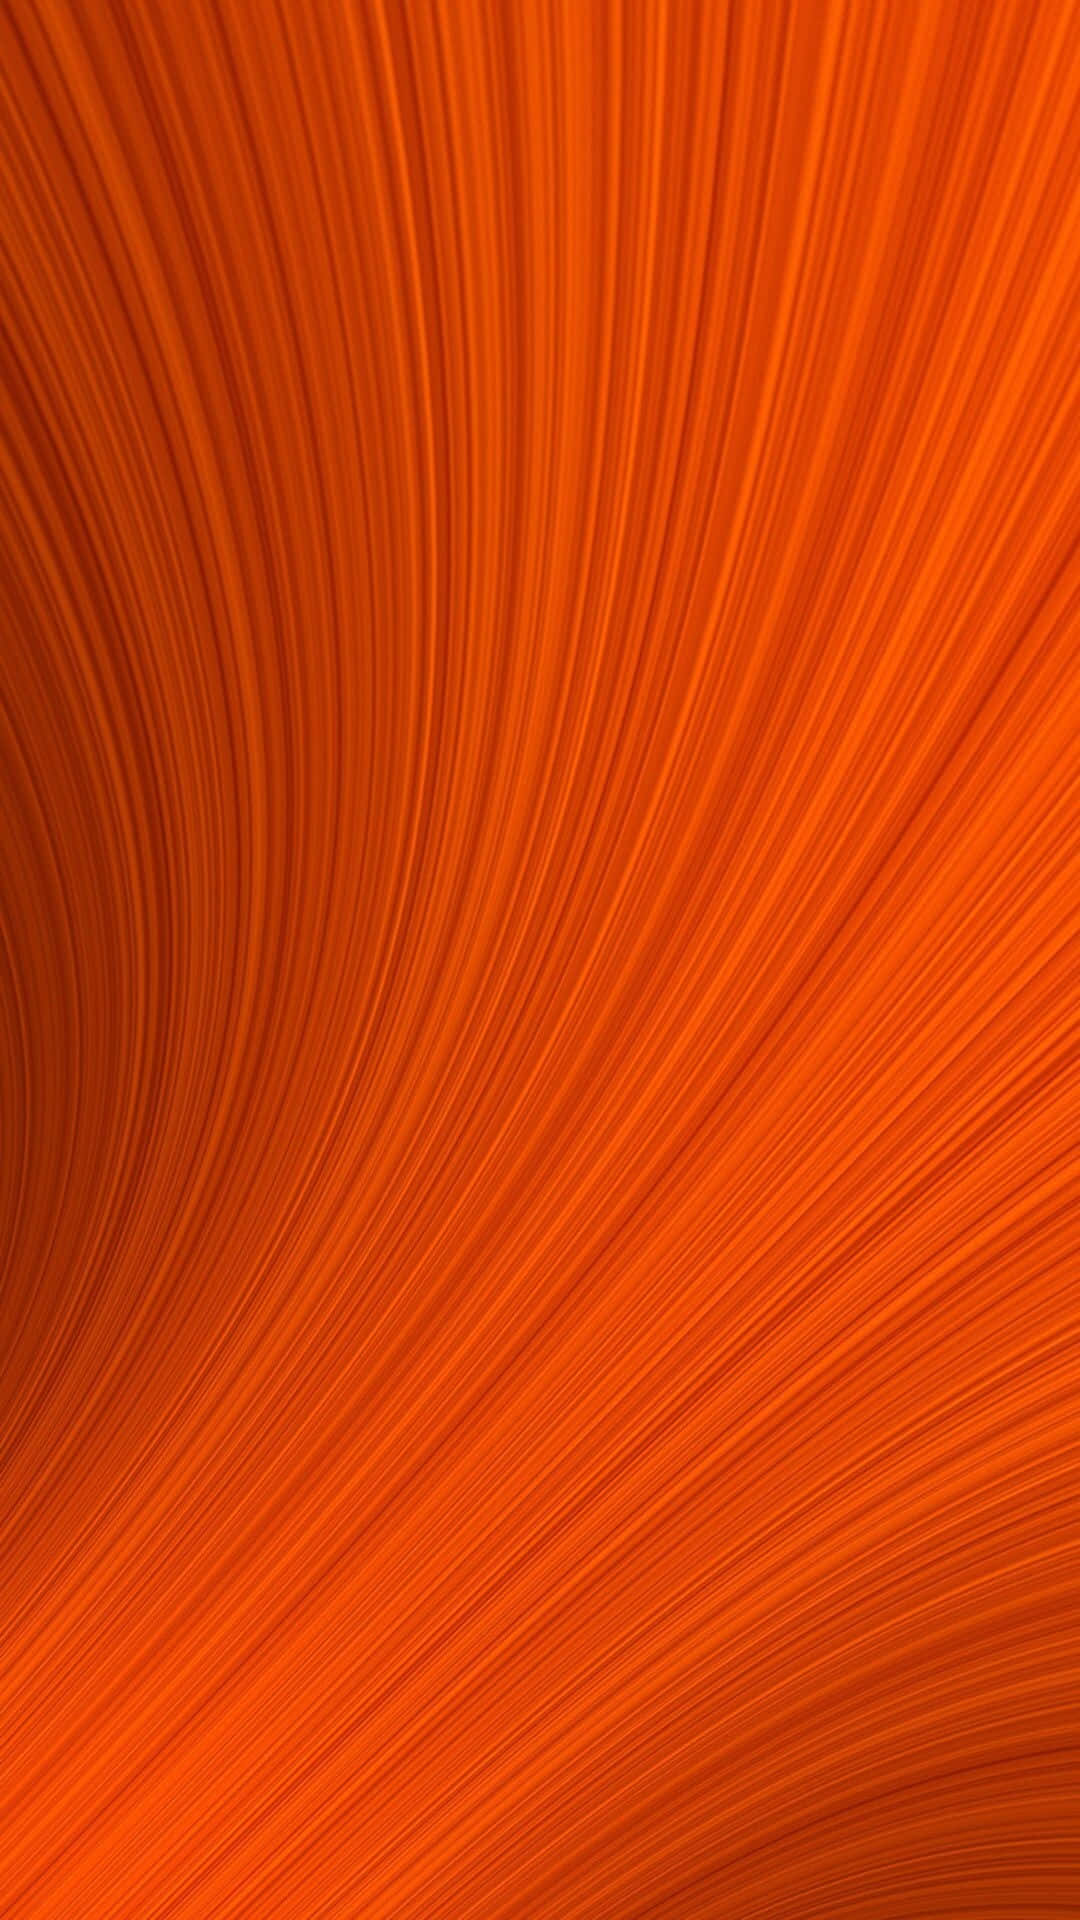 Orange Abstract Background With Wavy Lines Wallpaper